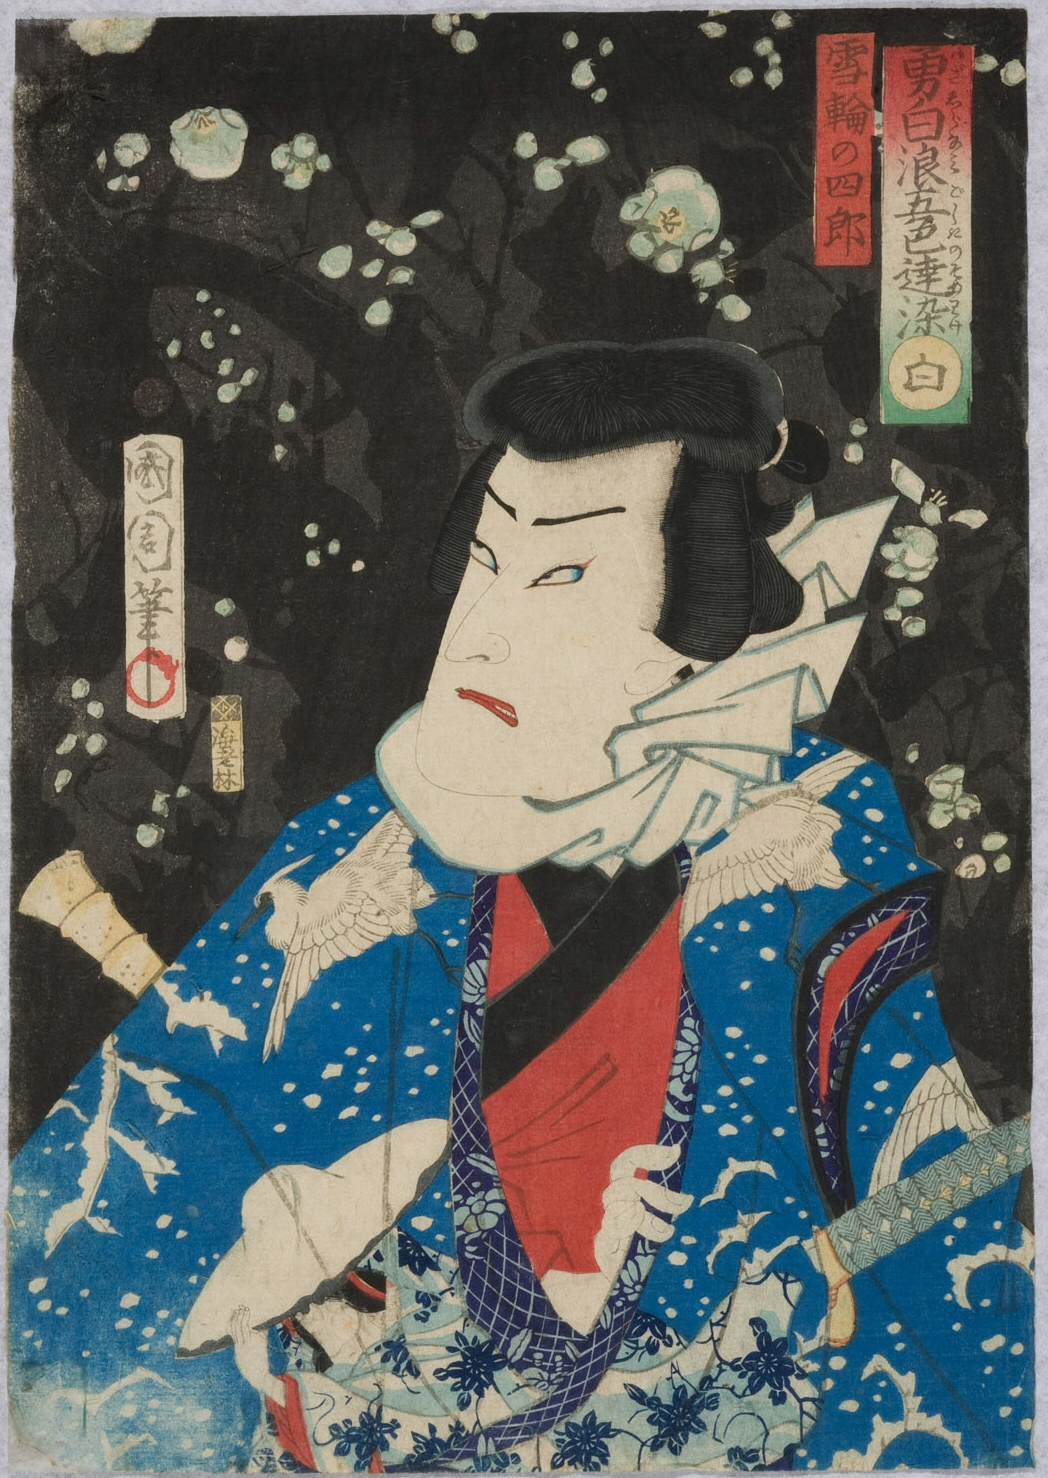 A kabuki actor in a blue kimono looks intensely to the distance.